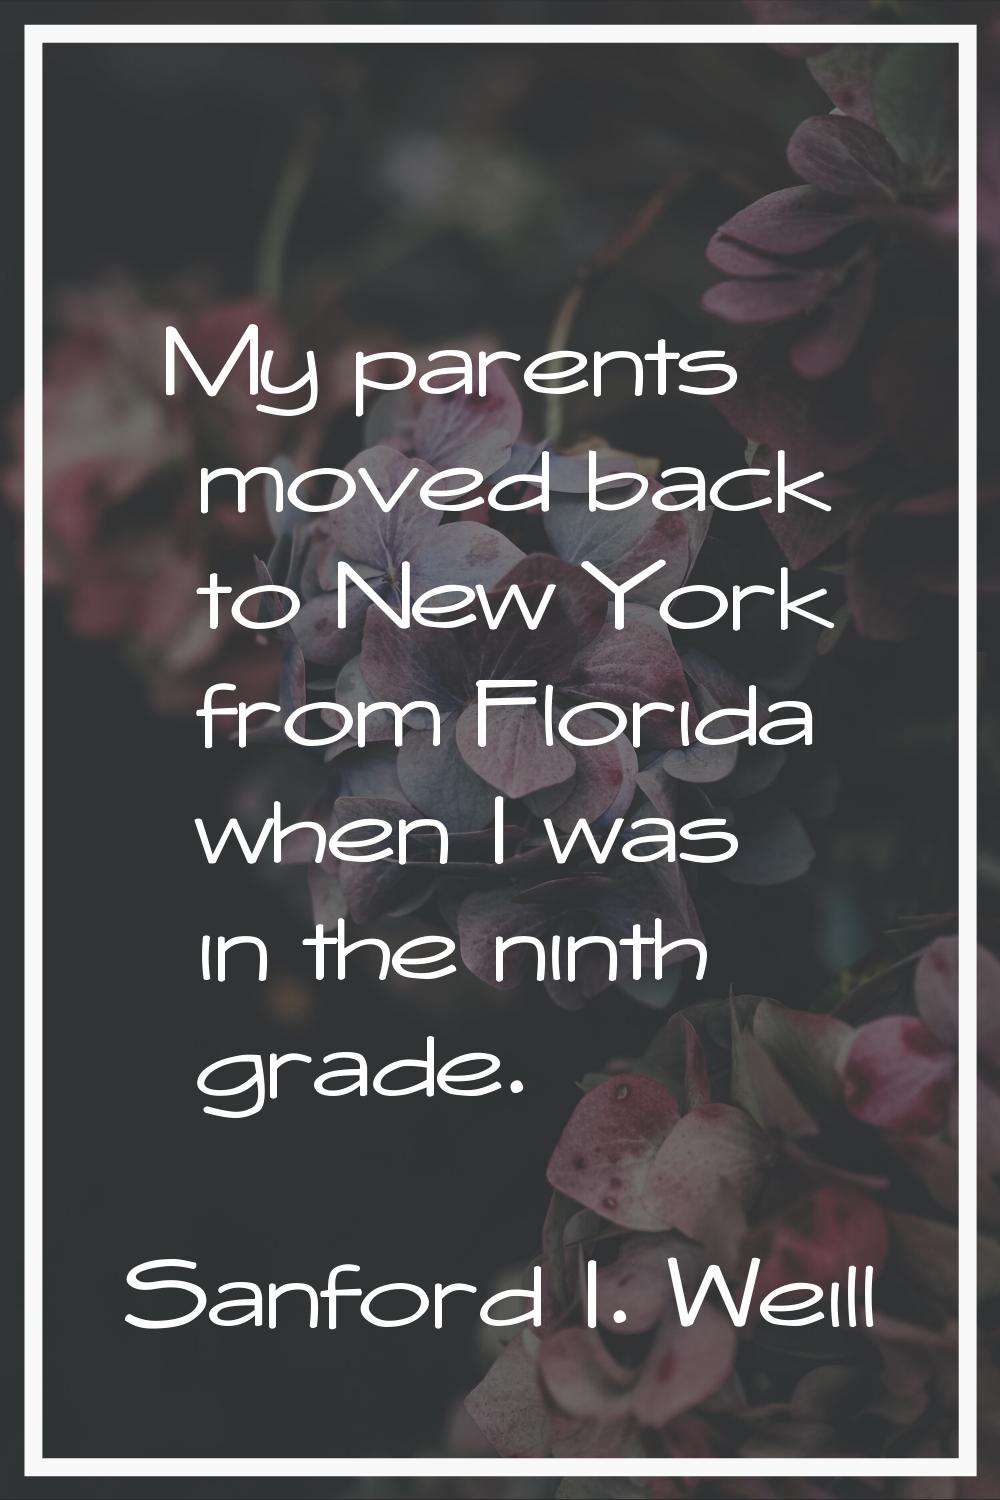 My parents moved back to New York from Florida when I was in the ninth grade.